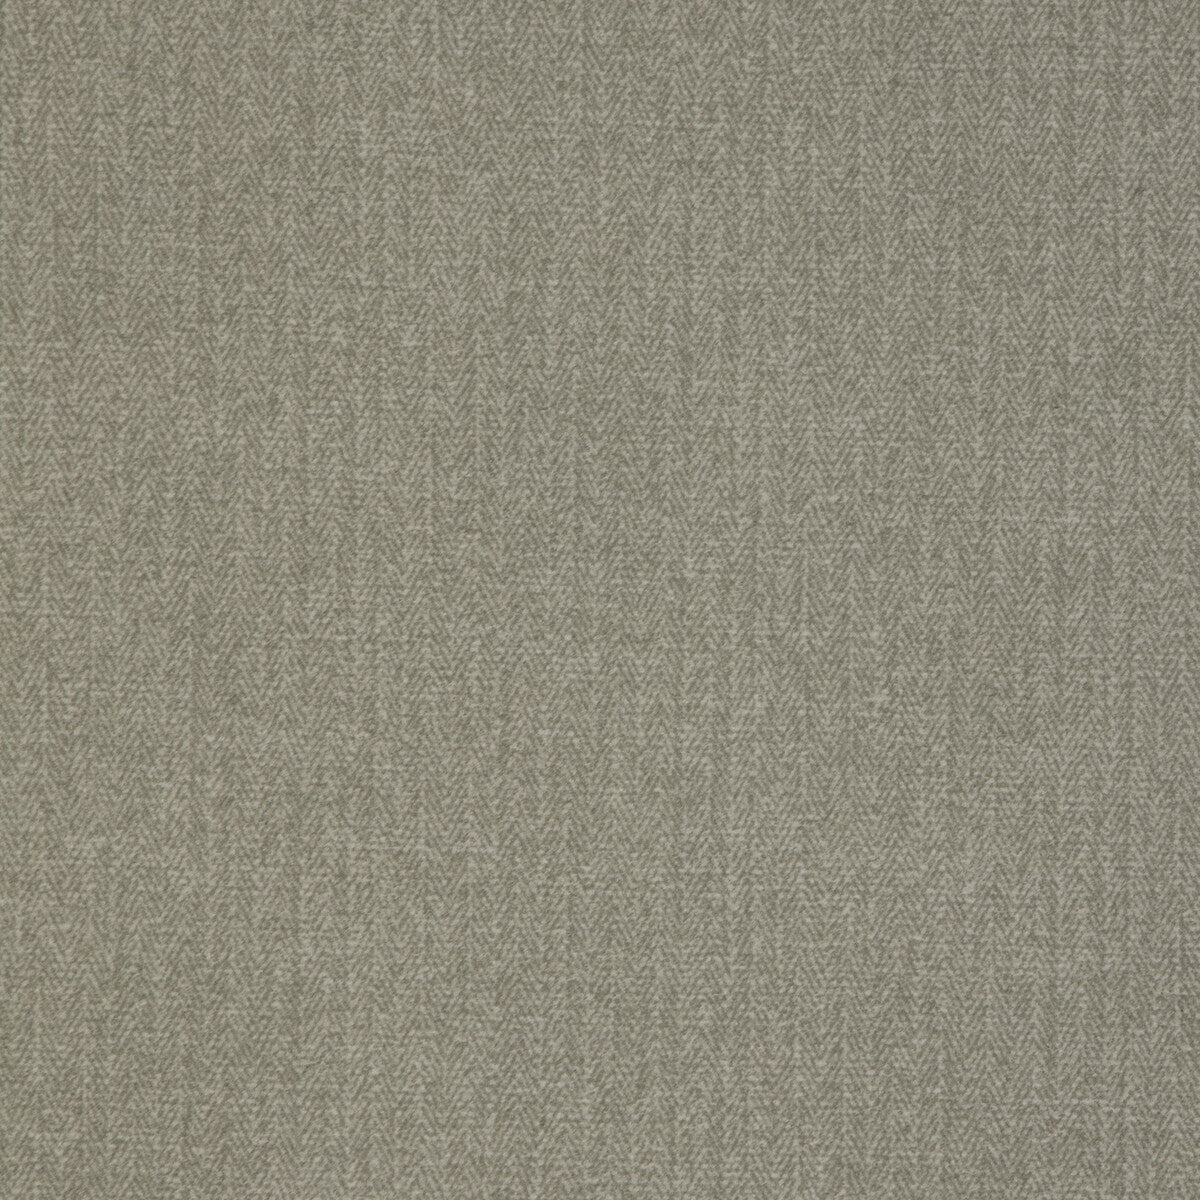 Kravet Design fabric in twill-350272 color - pattern TWILL.3502-72.0 - by Kravet Design in the Performance collection